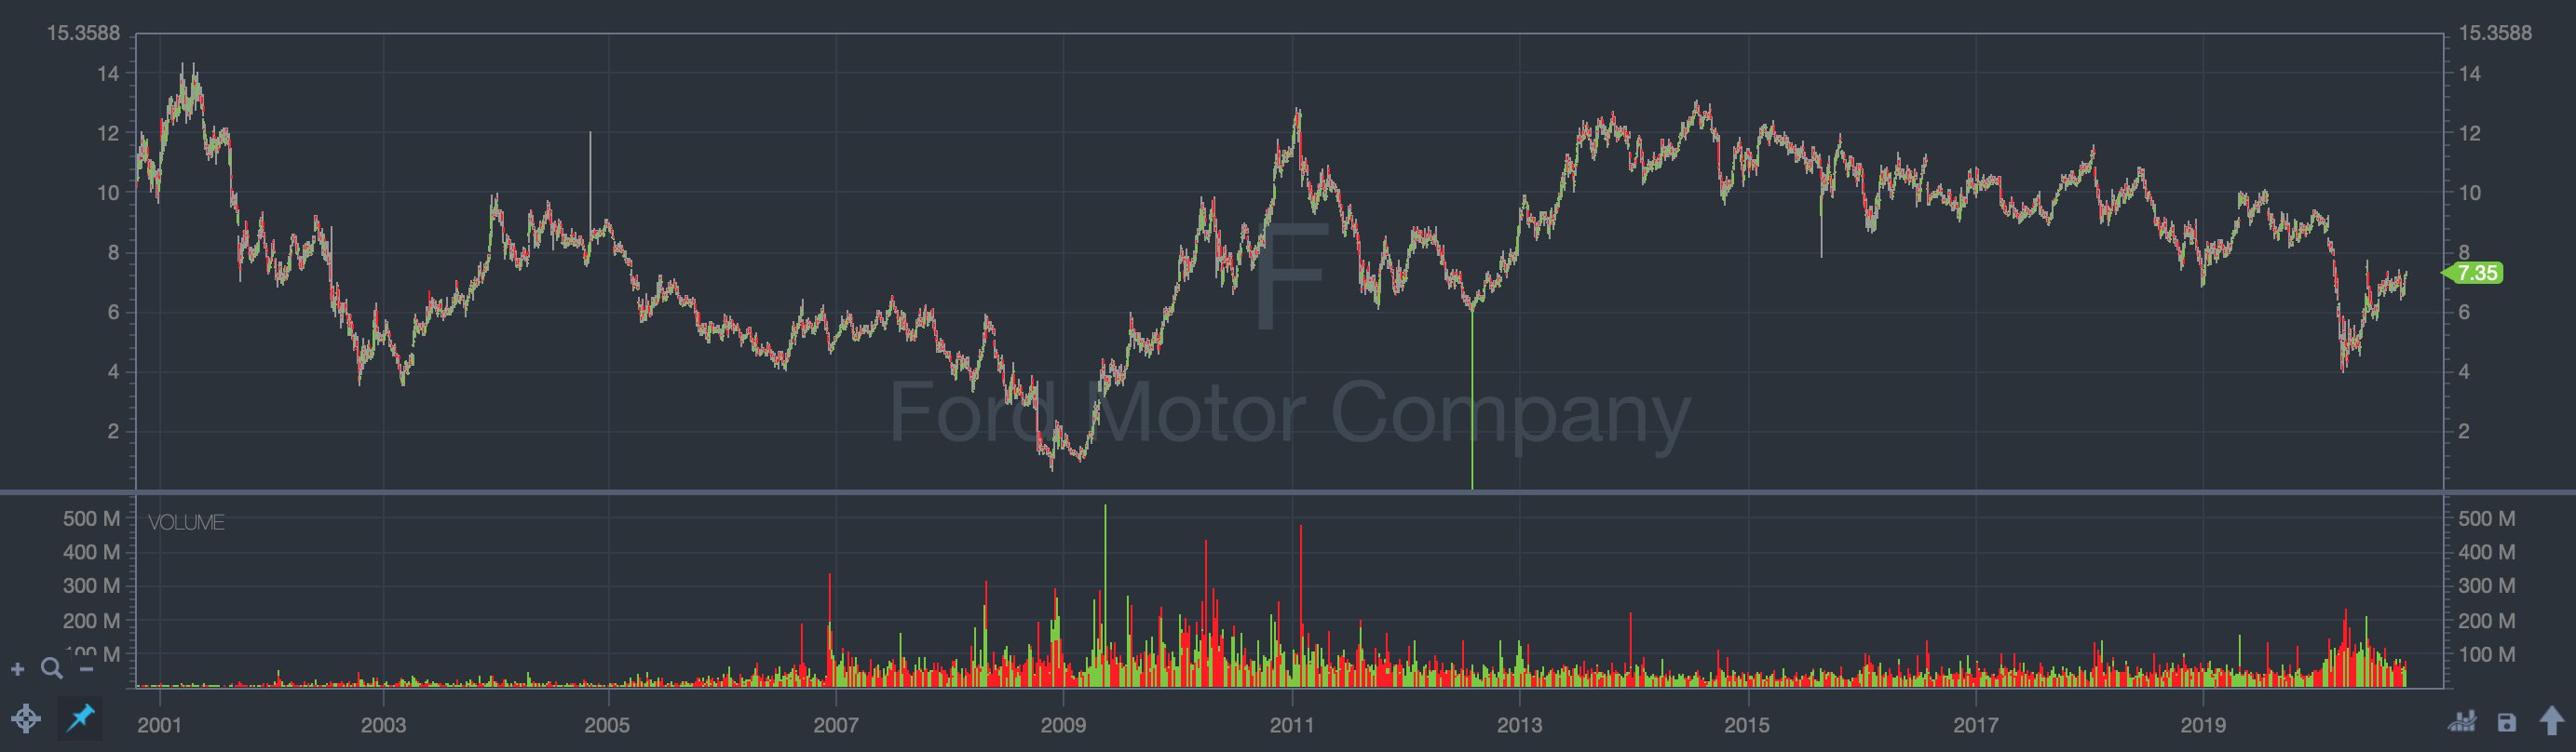 most successful penny stocks in history ford